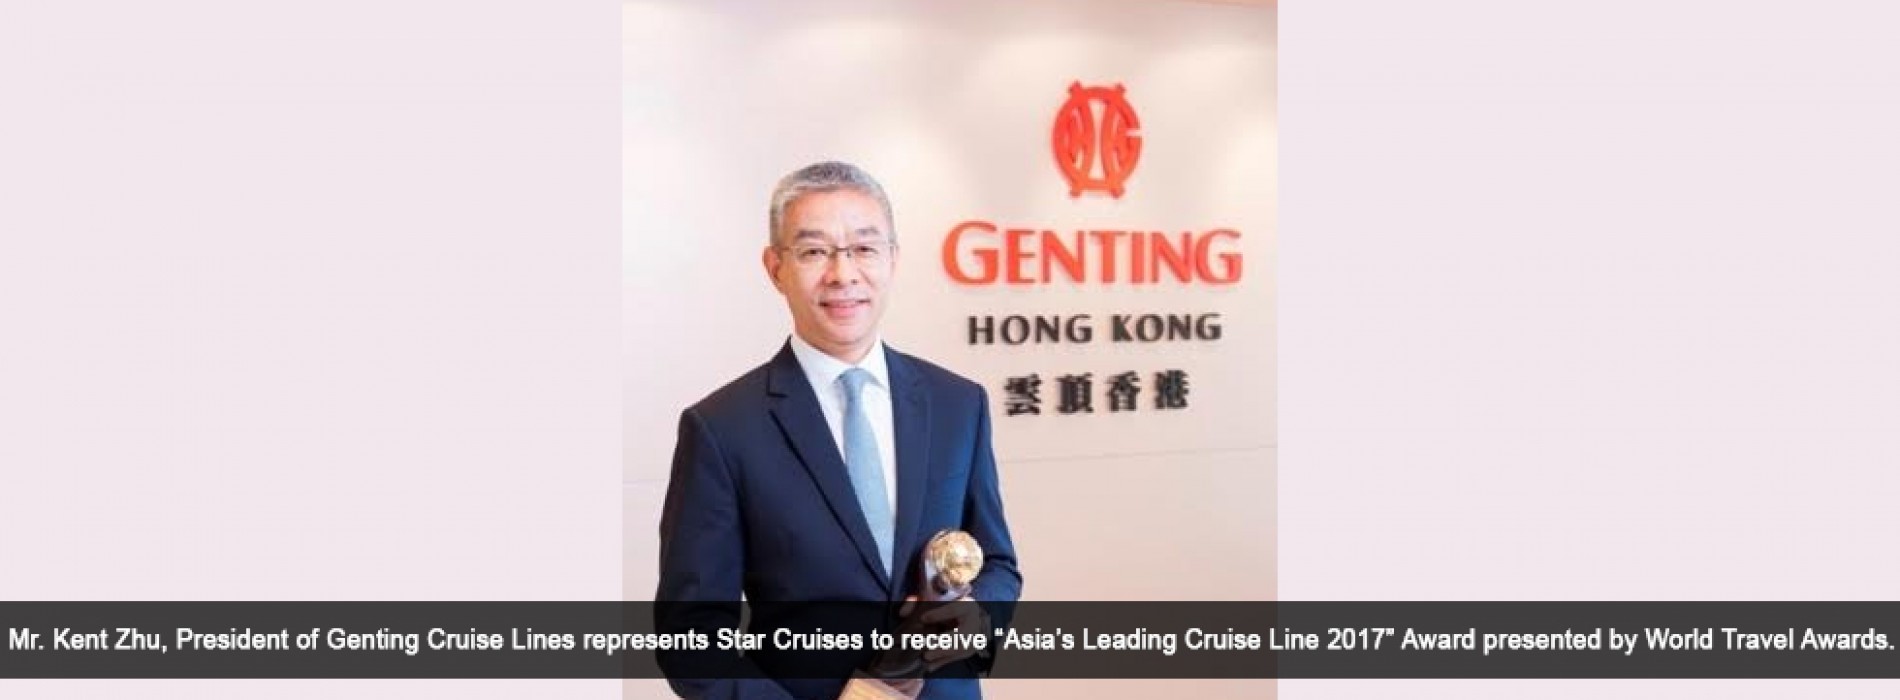 Star Cruises voted “Asia’s Leading Cruise Line 2017”